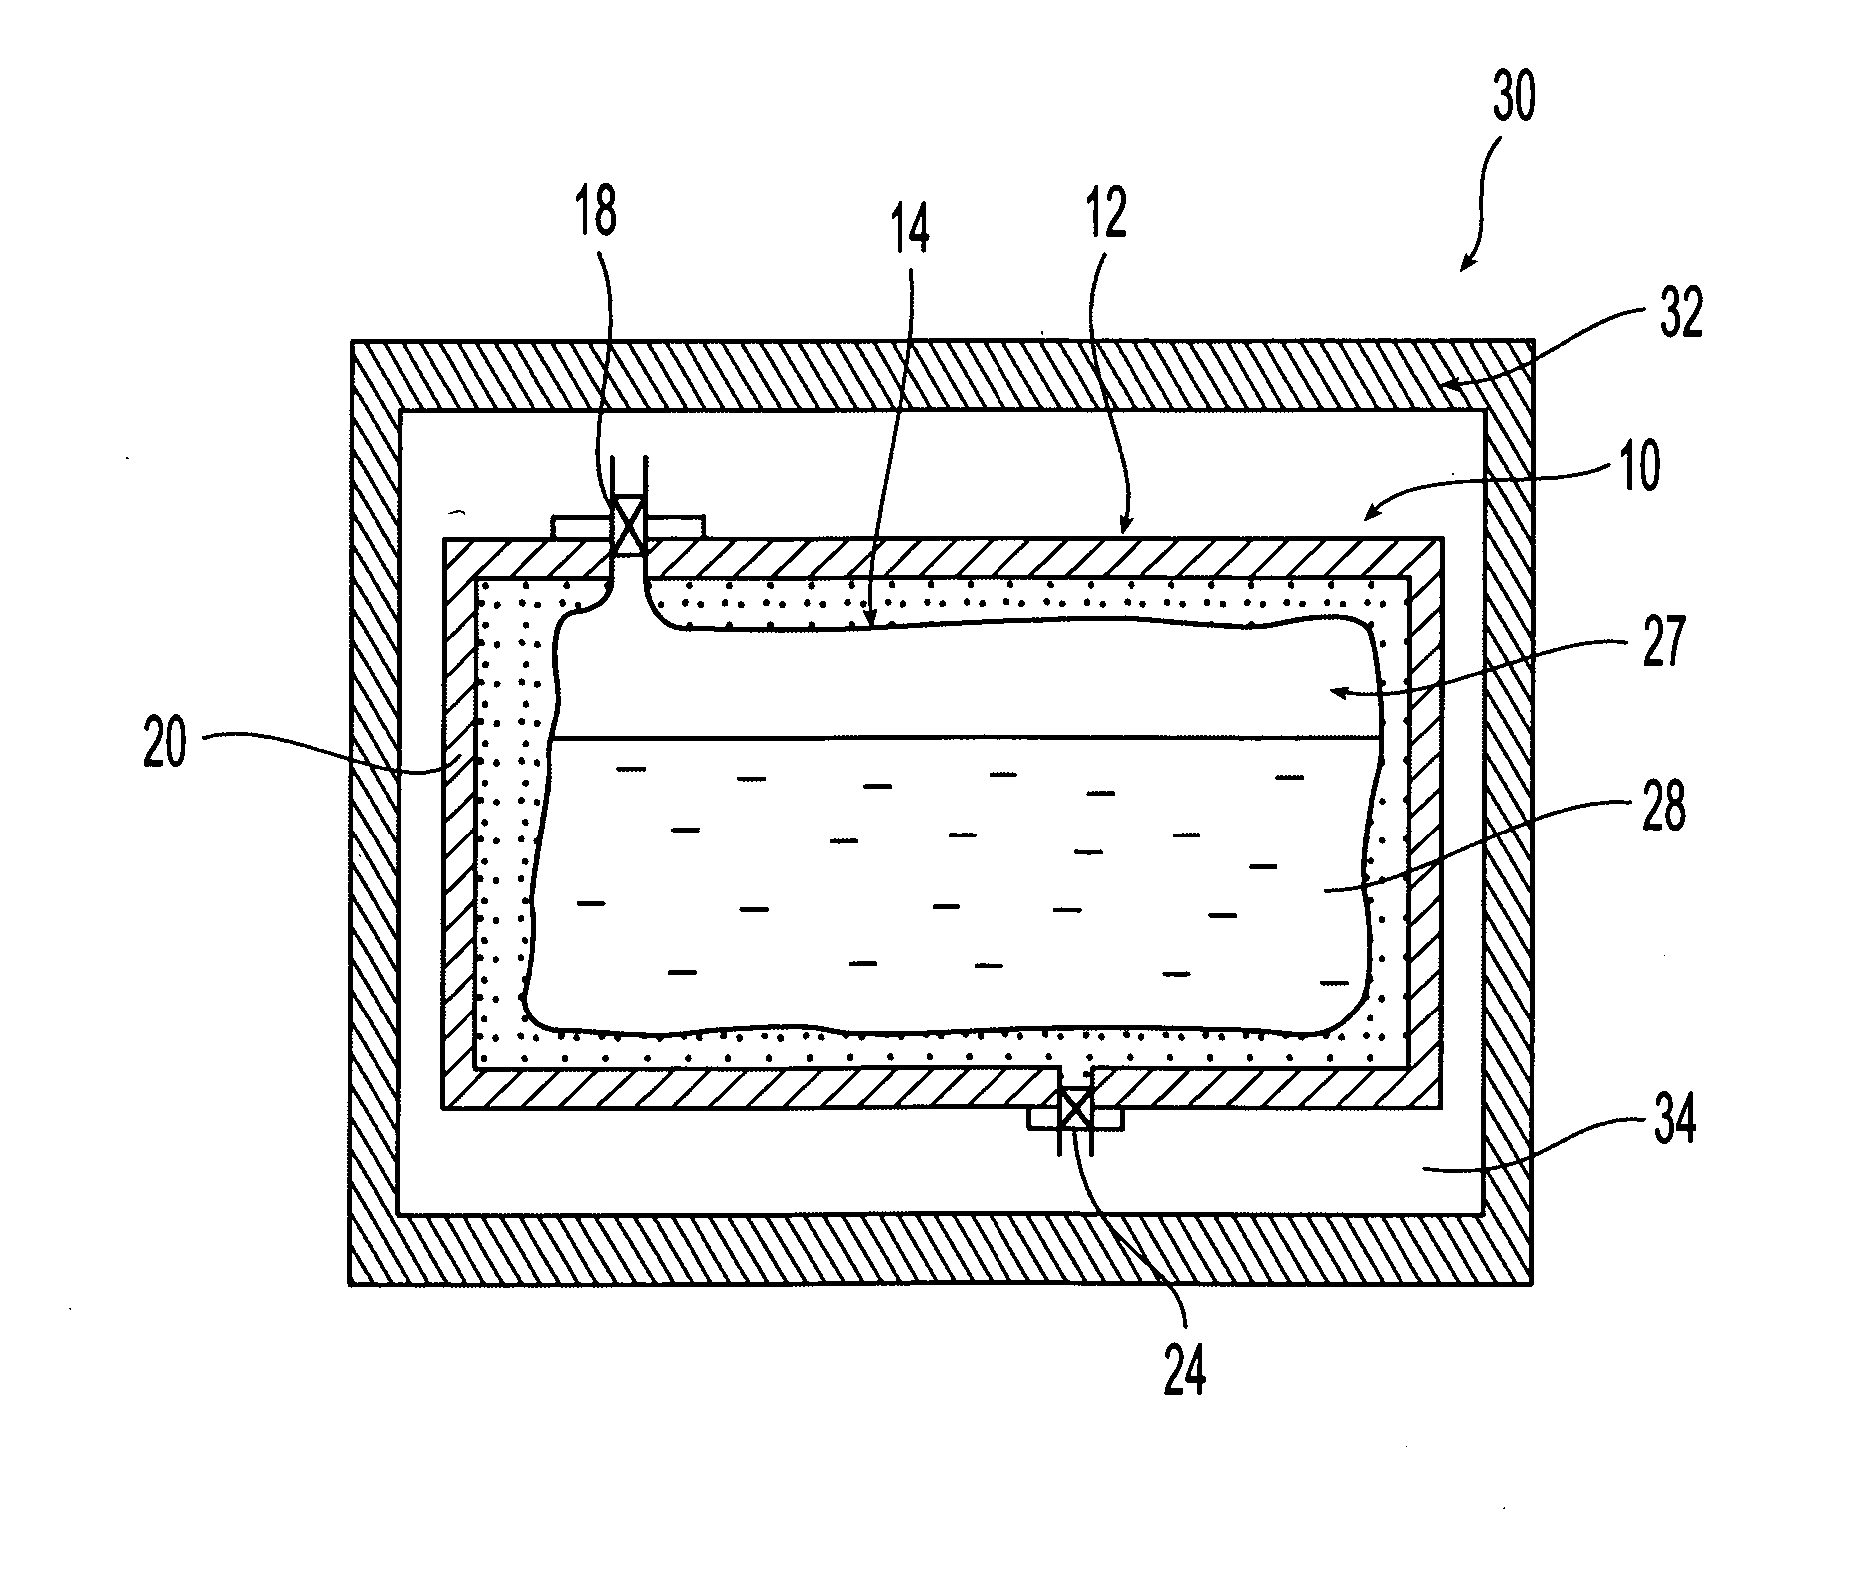 Fuel cartridge for fuel cells